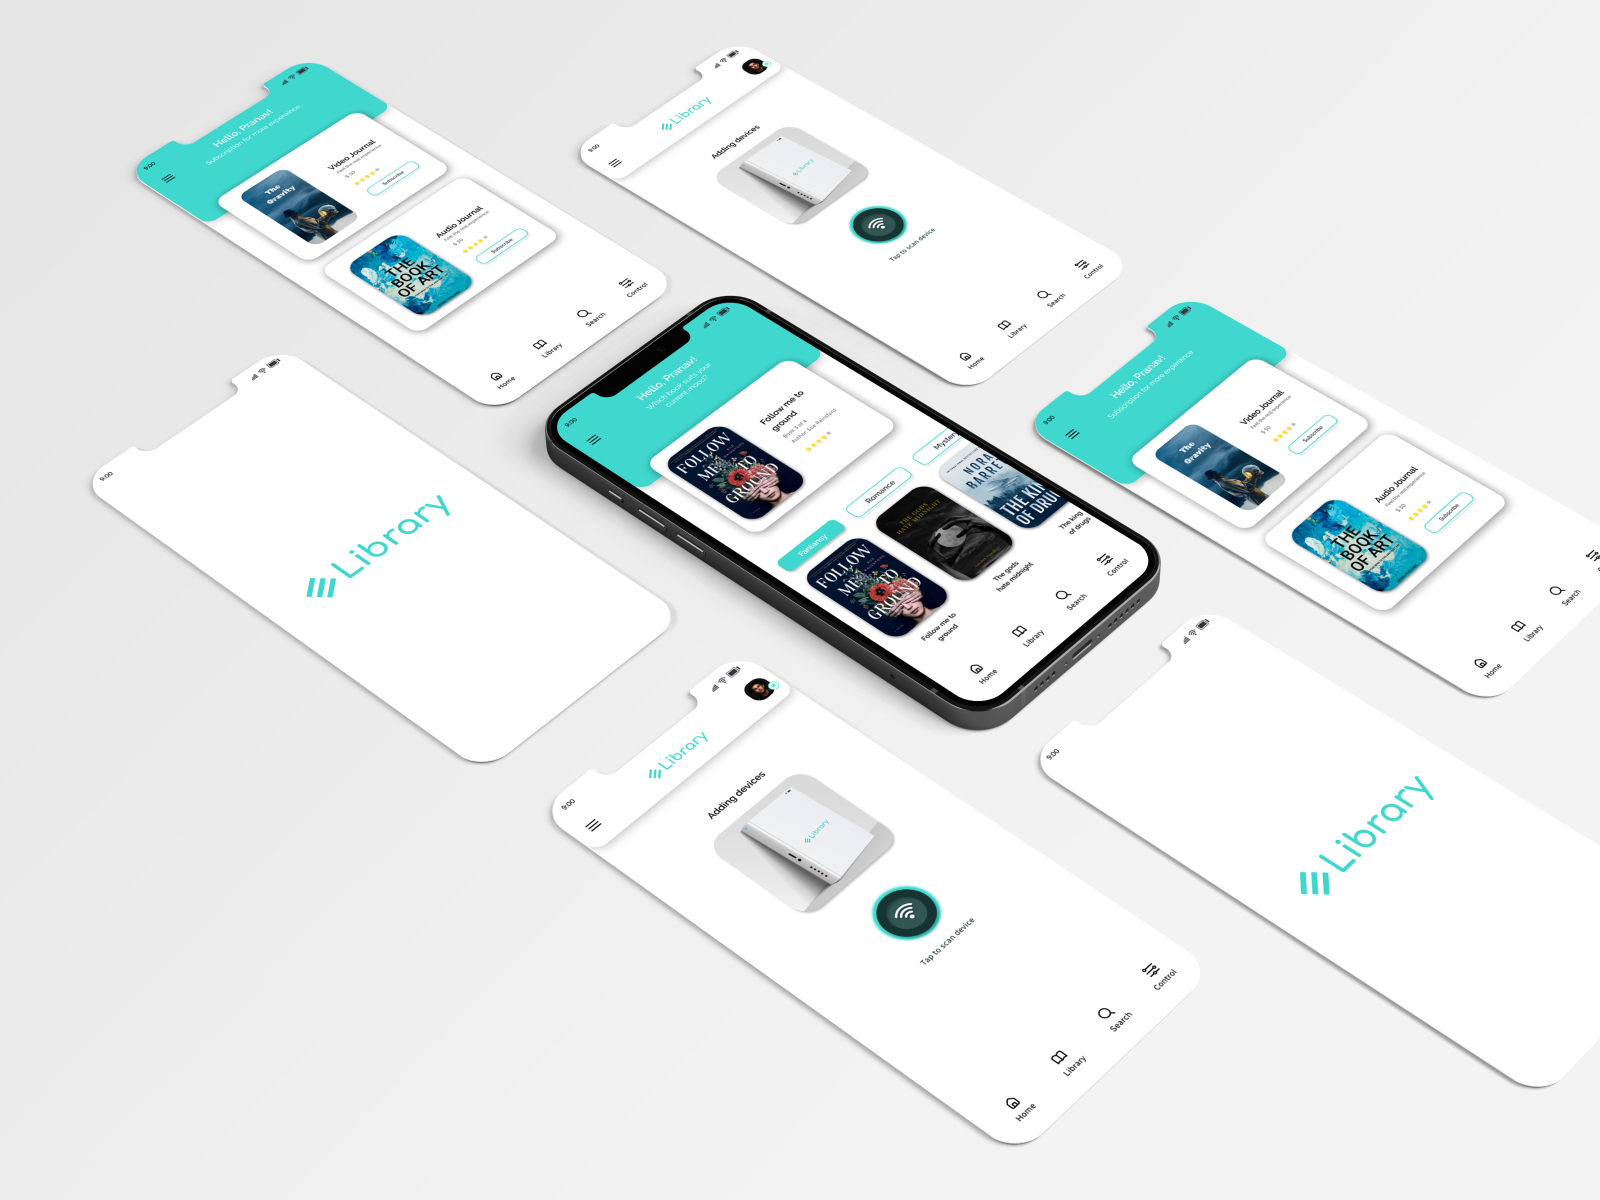 Library app mockup screens by subi on Dribbble